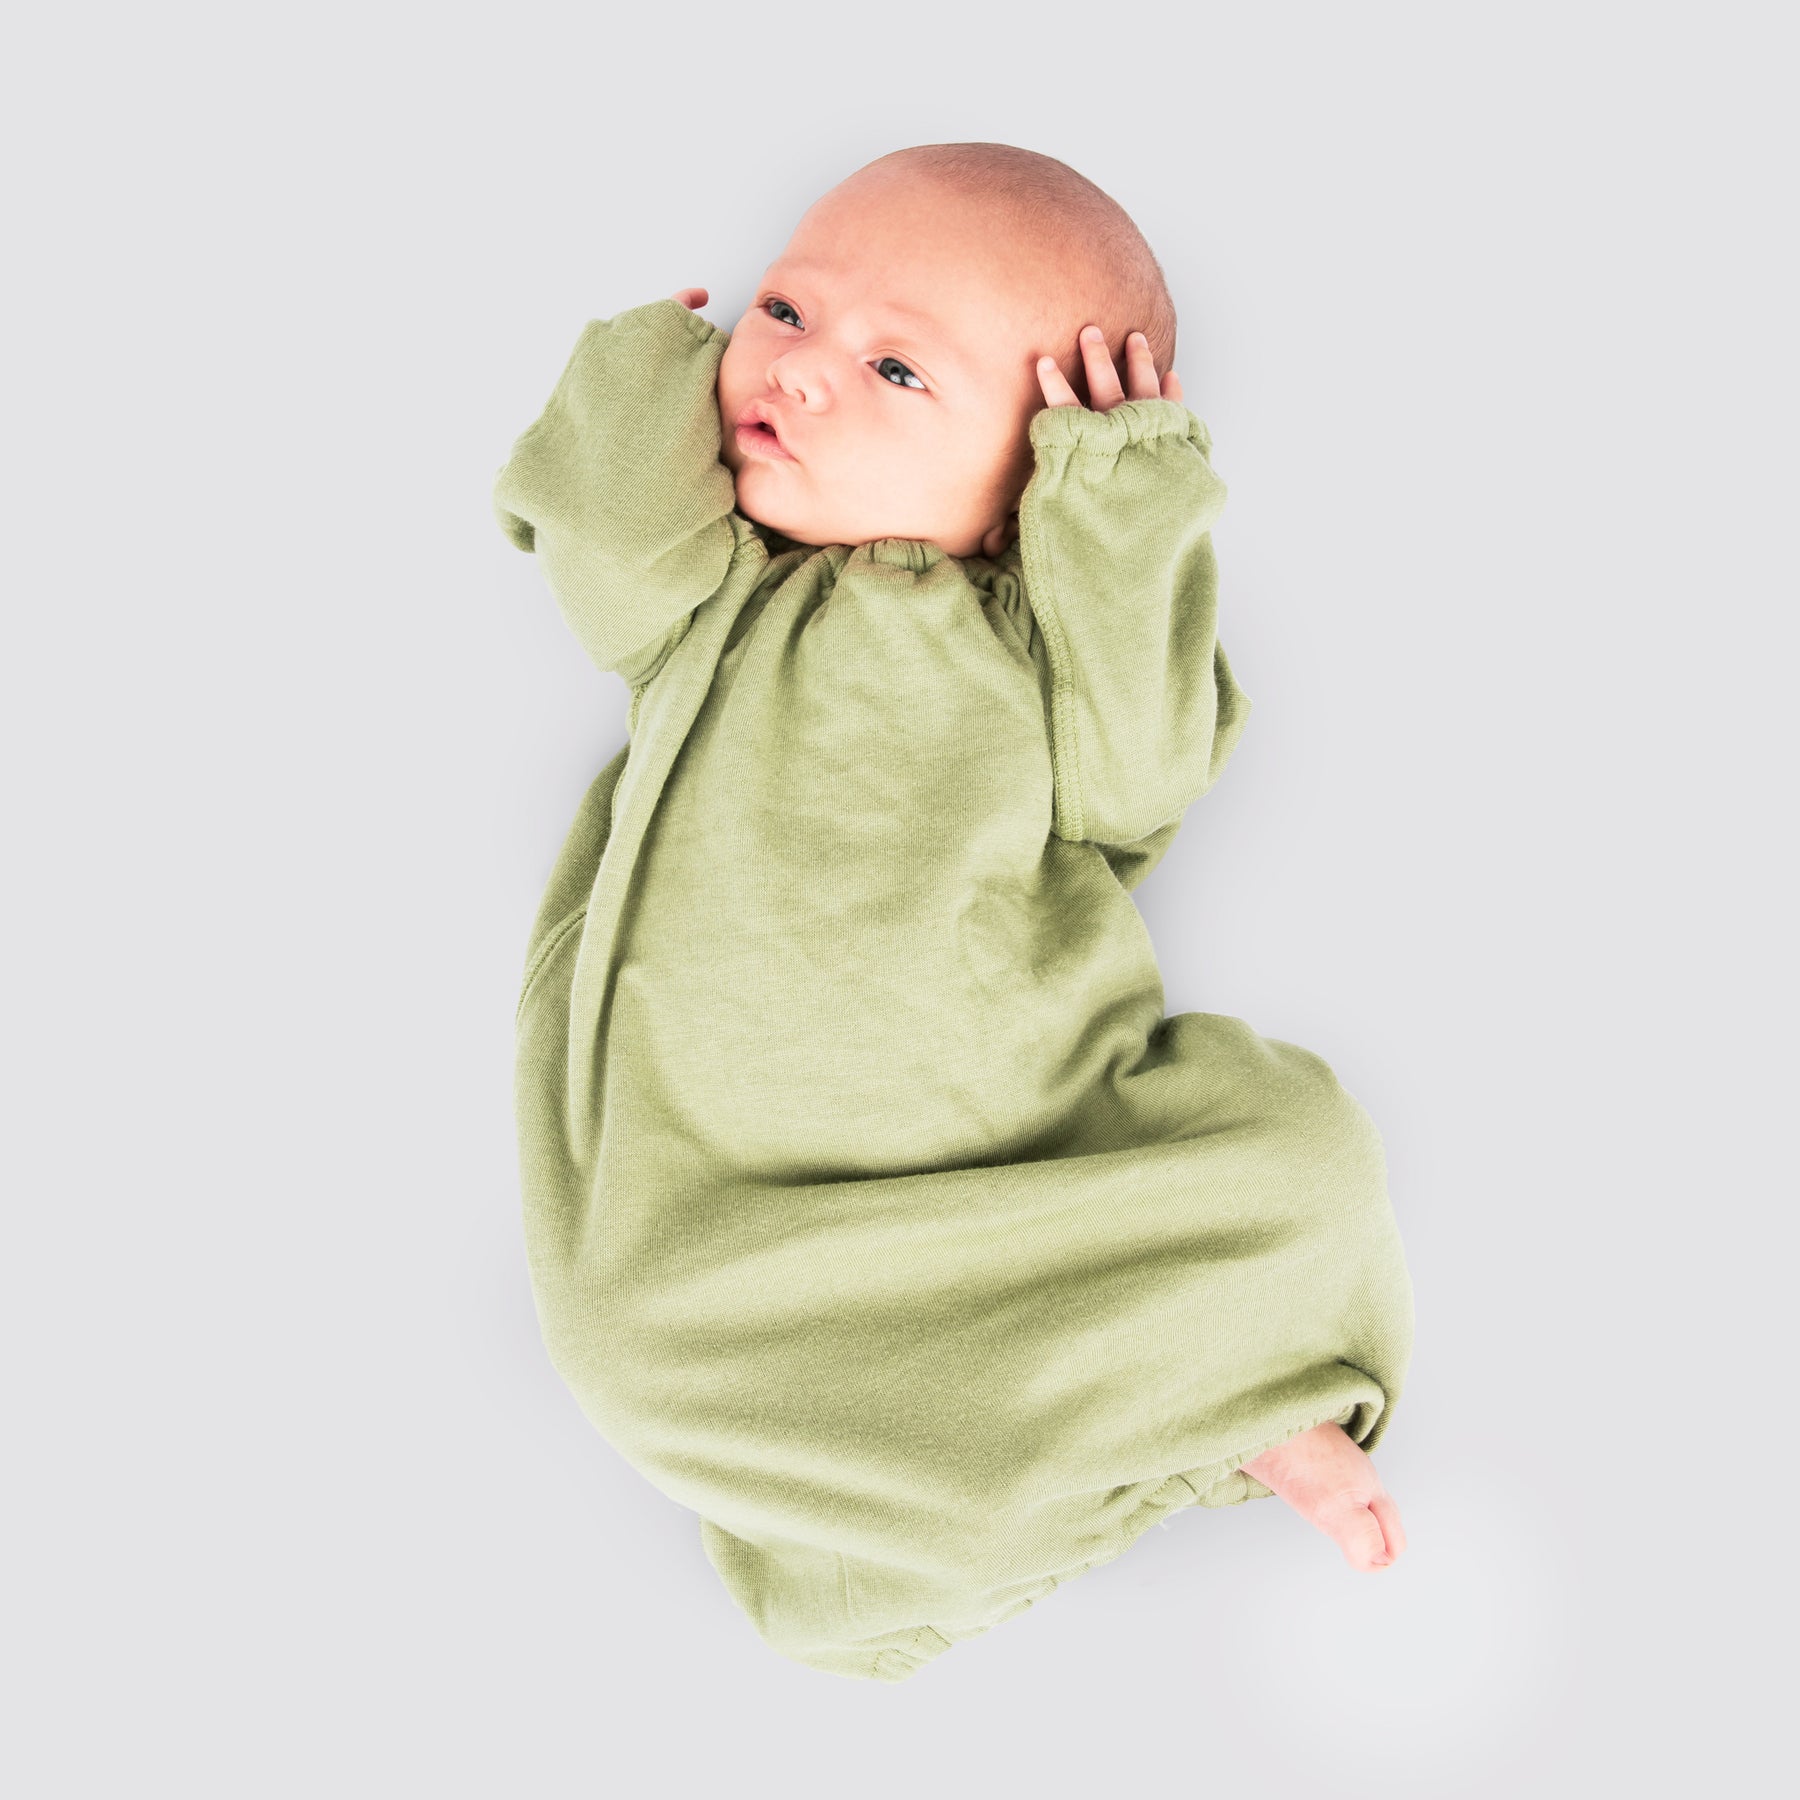 Heavenly soft baby clothes lets you effortlessly dress and undress your baby. An absolute essential for every happy baby. Bamboo and organic cotton. Gender Neutral. Mommy and me clothes. Made in USA.